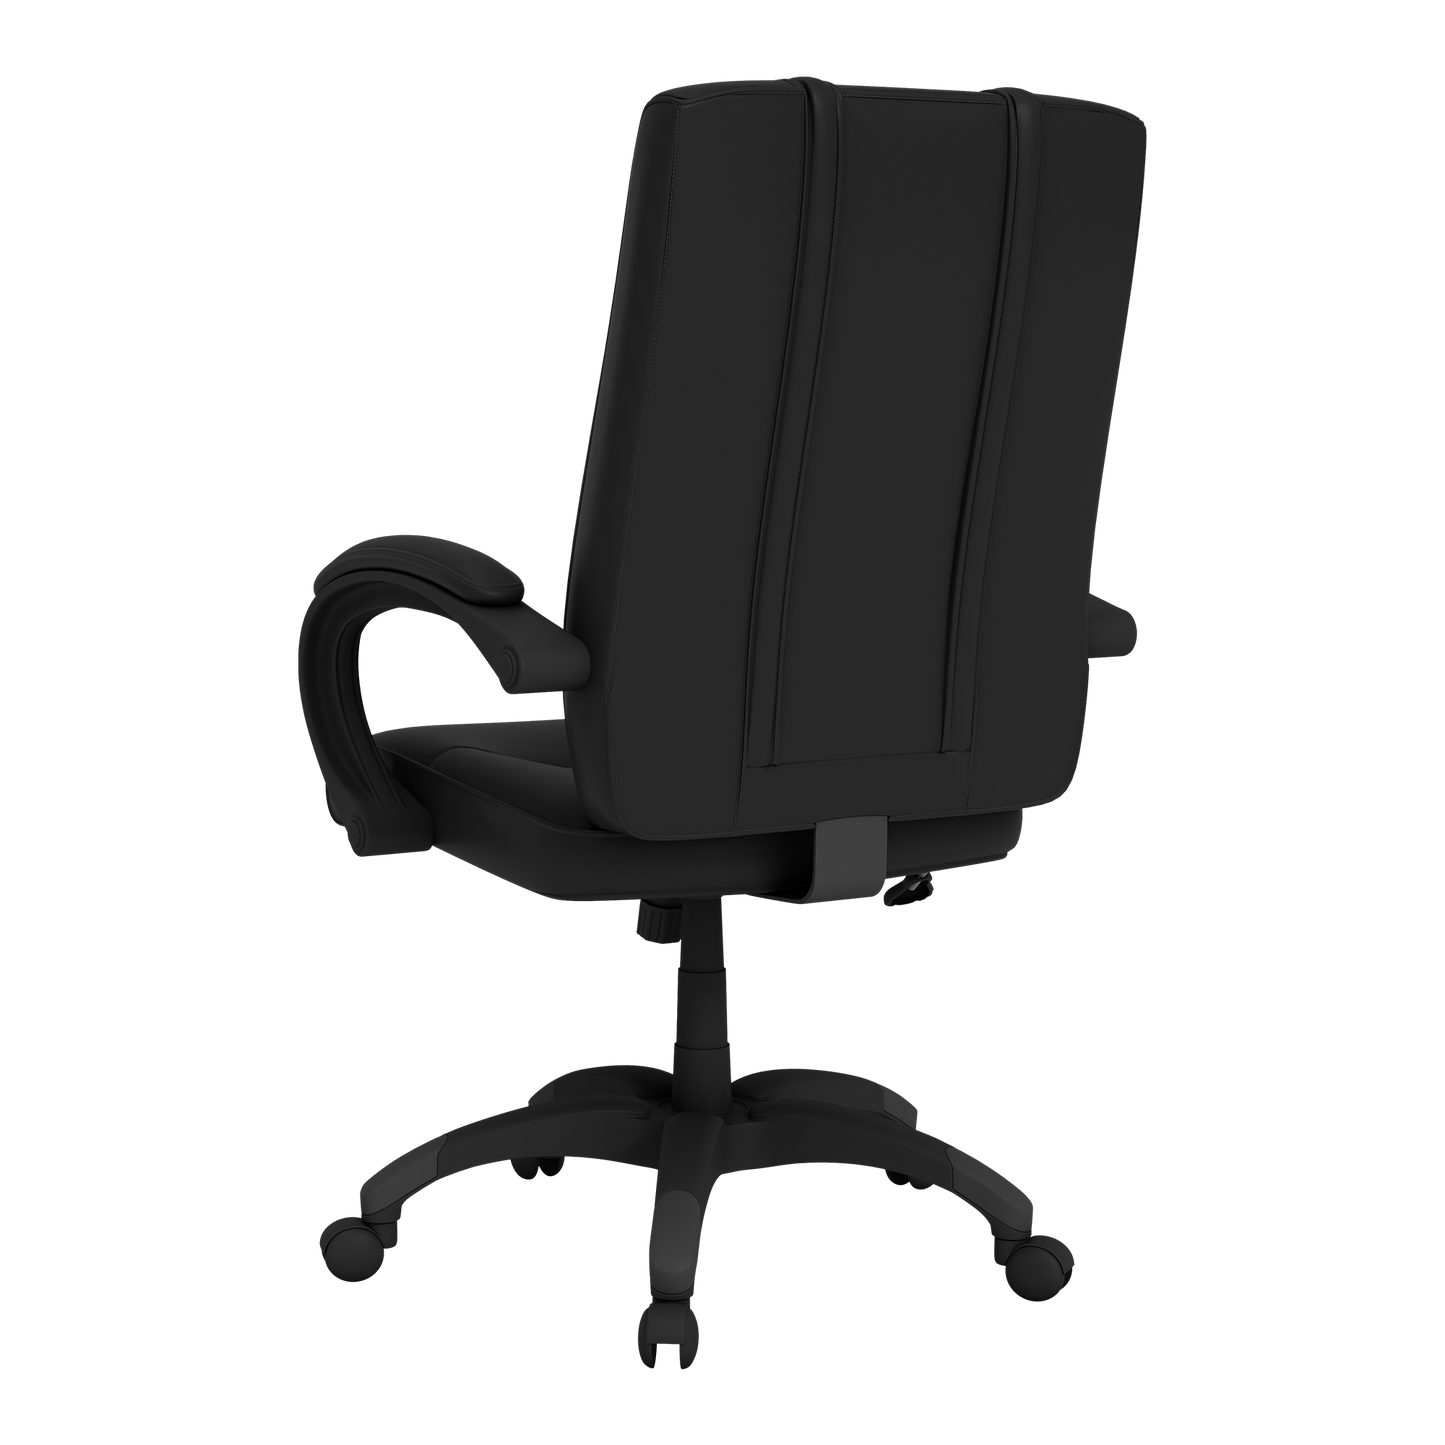 Office Chair 1000 with Montreal Canadiens Logo